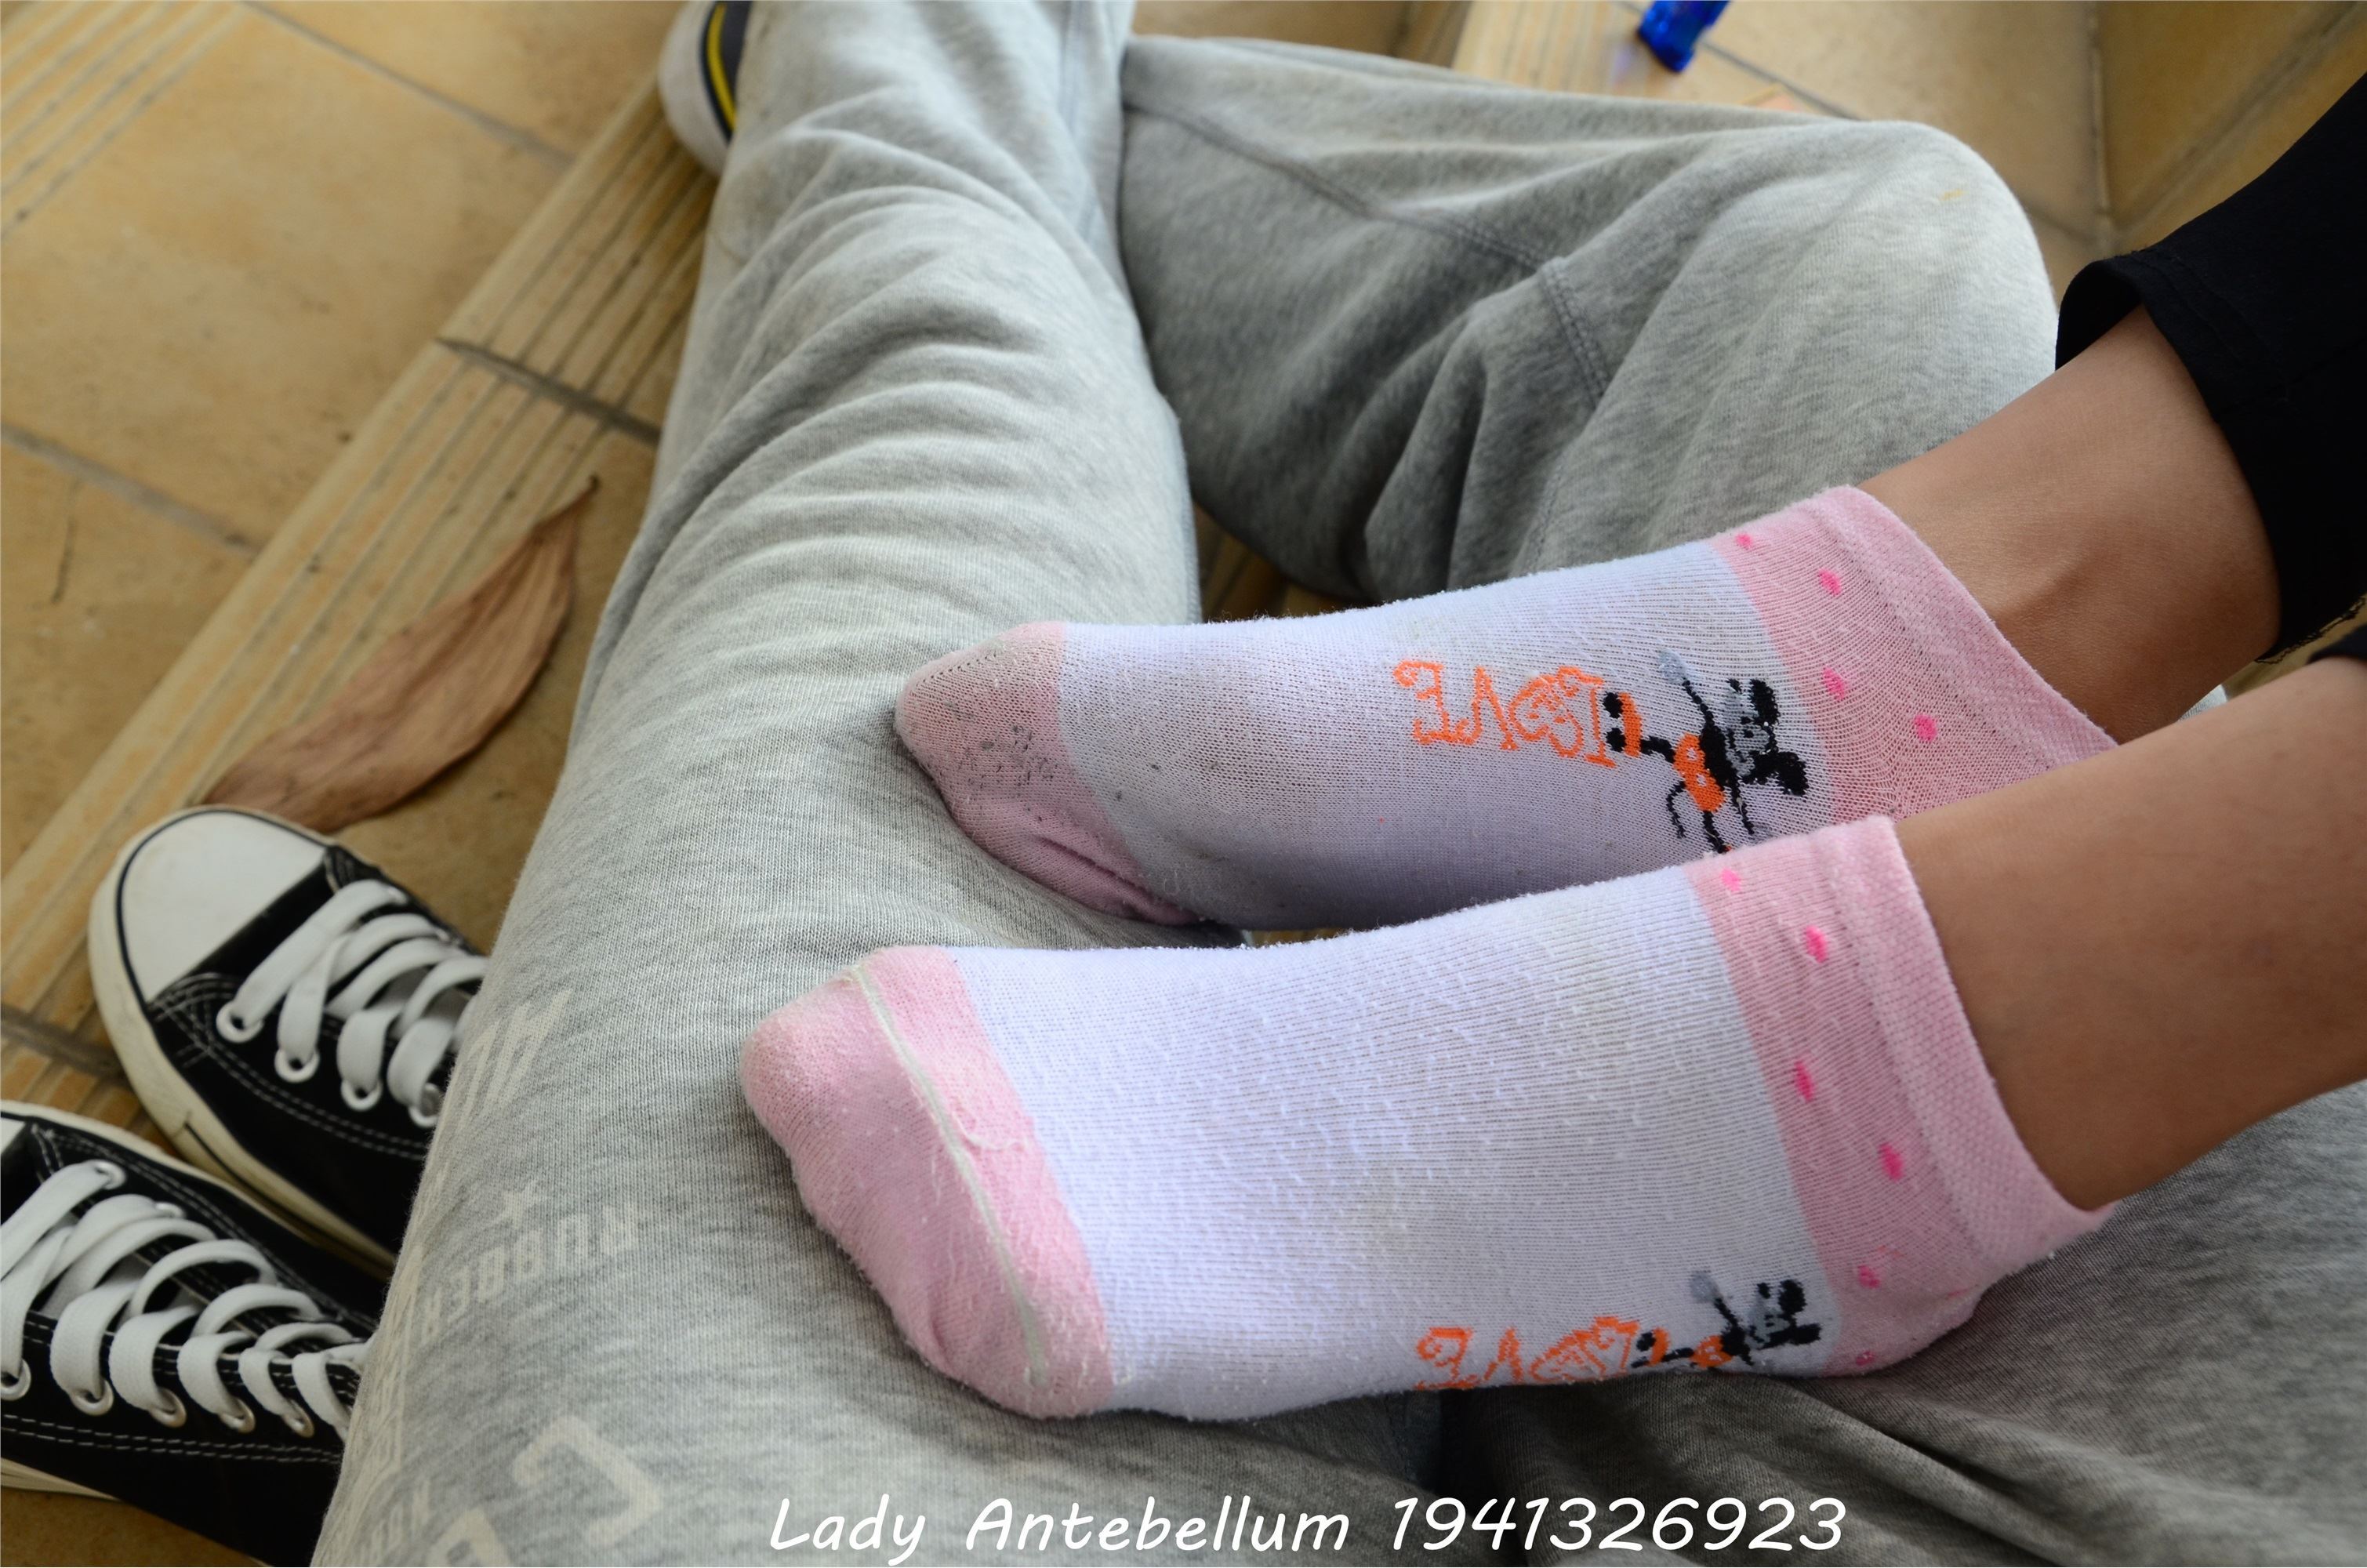 Goddess's feet and legs cotton stockings before the war 085